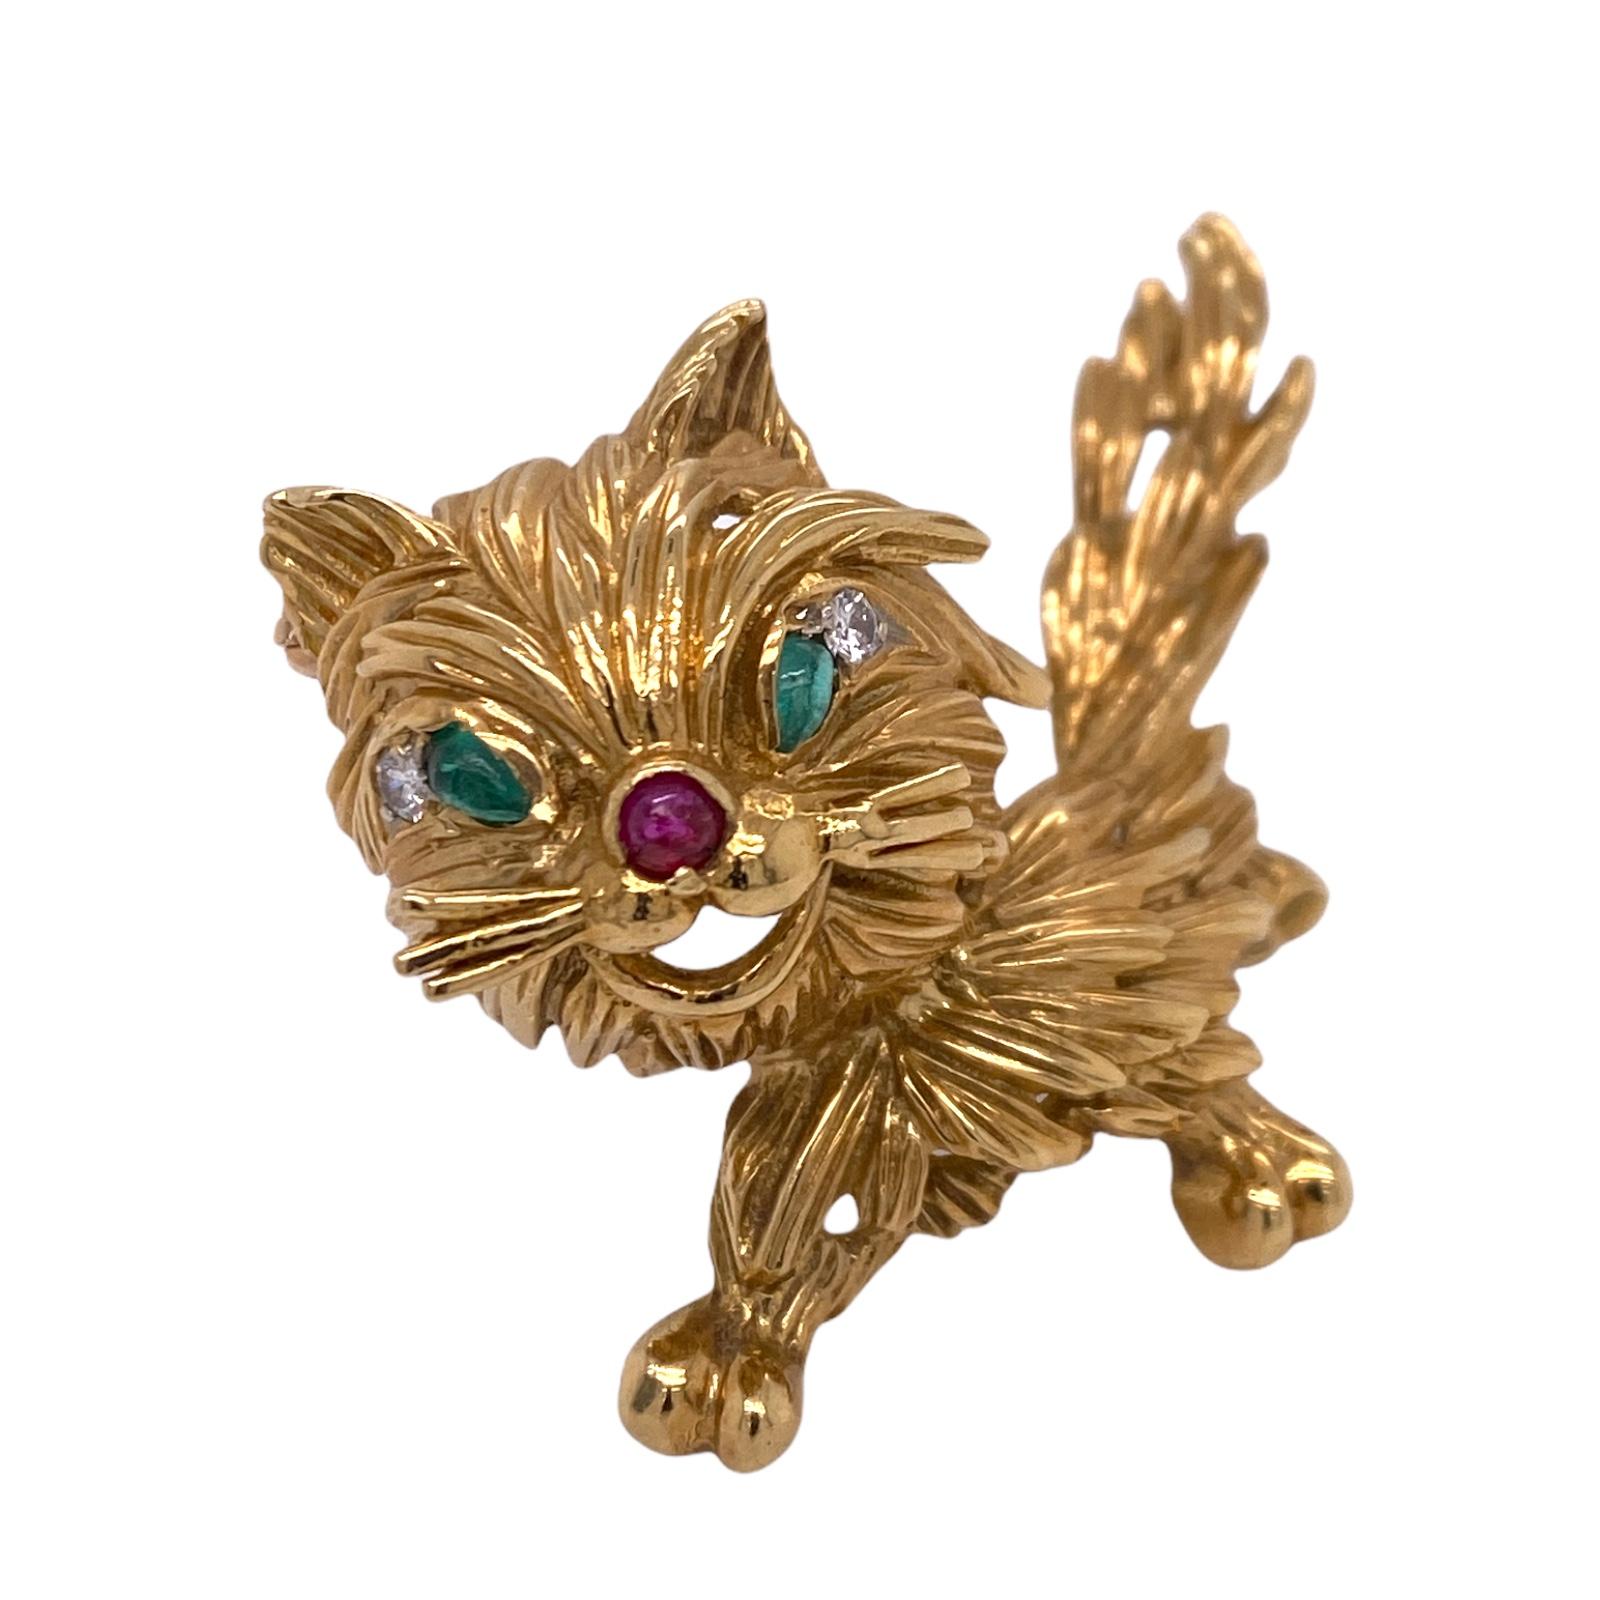 Adorable cat pin fashioned in textured 18 karat yellow gold. The cat features diamond, emerald, and ruby accents, and measures 1.5 x 2.0 inches.